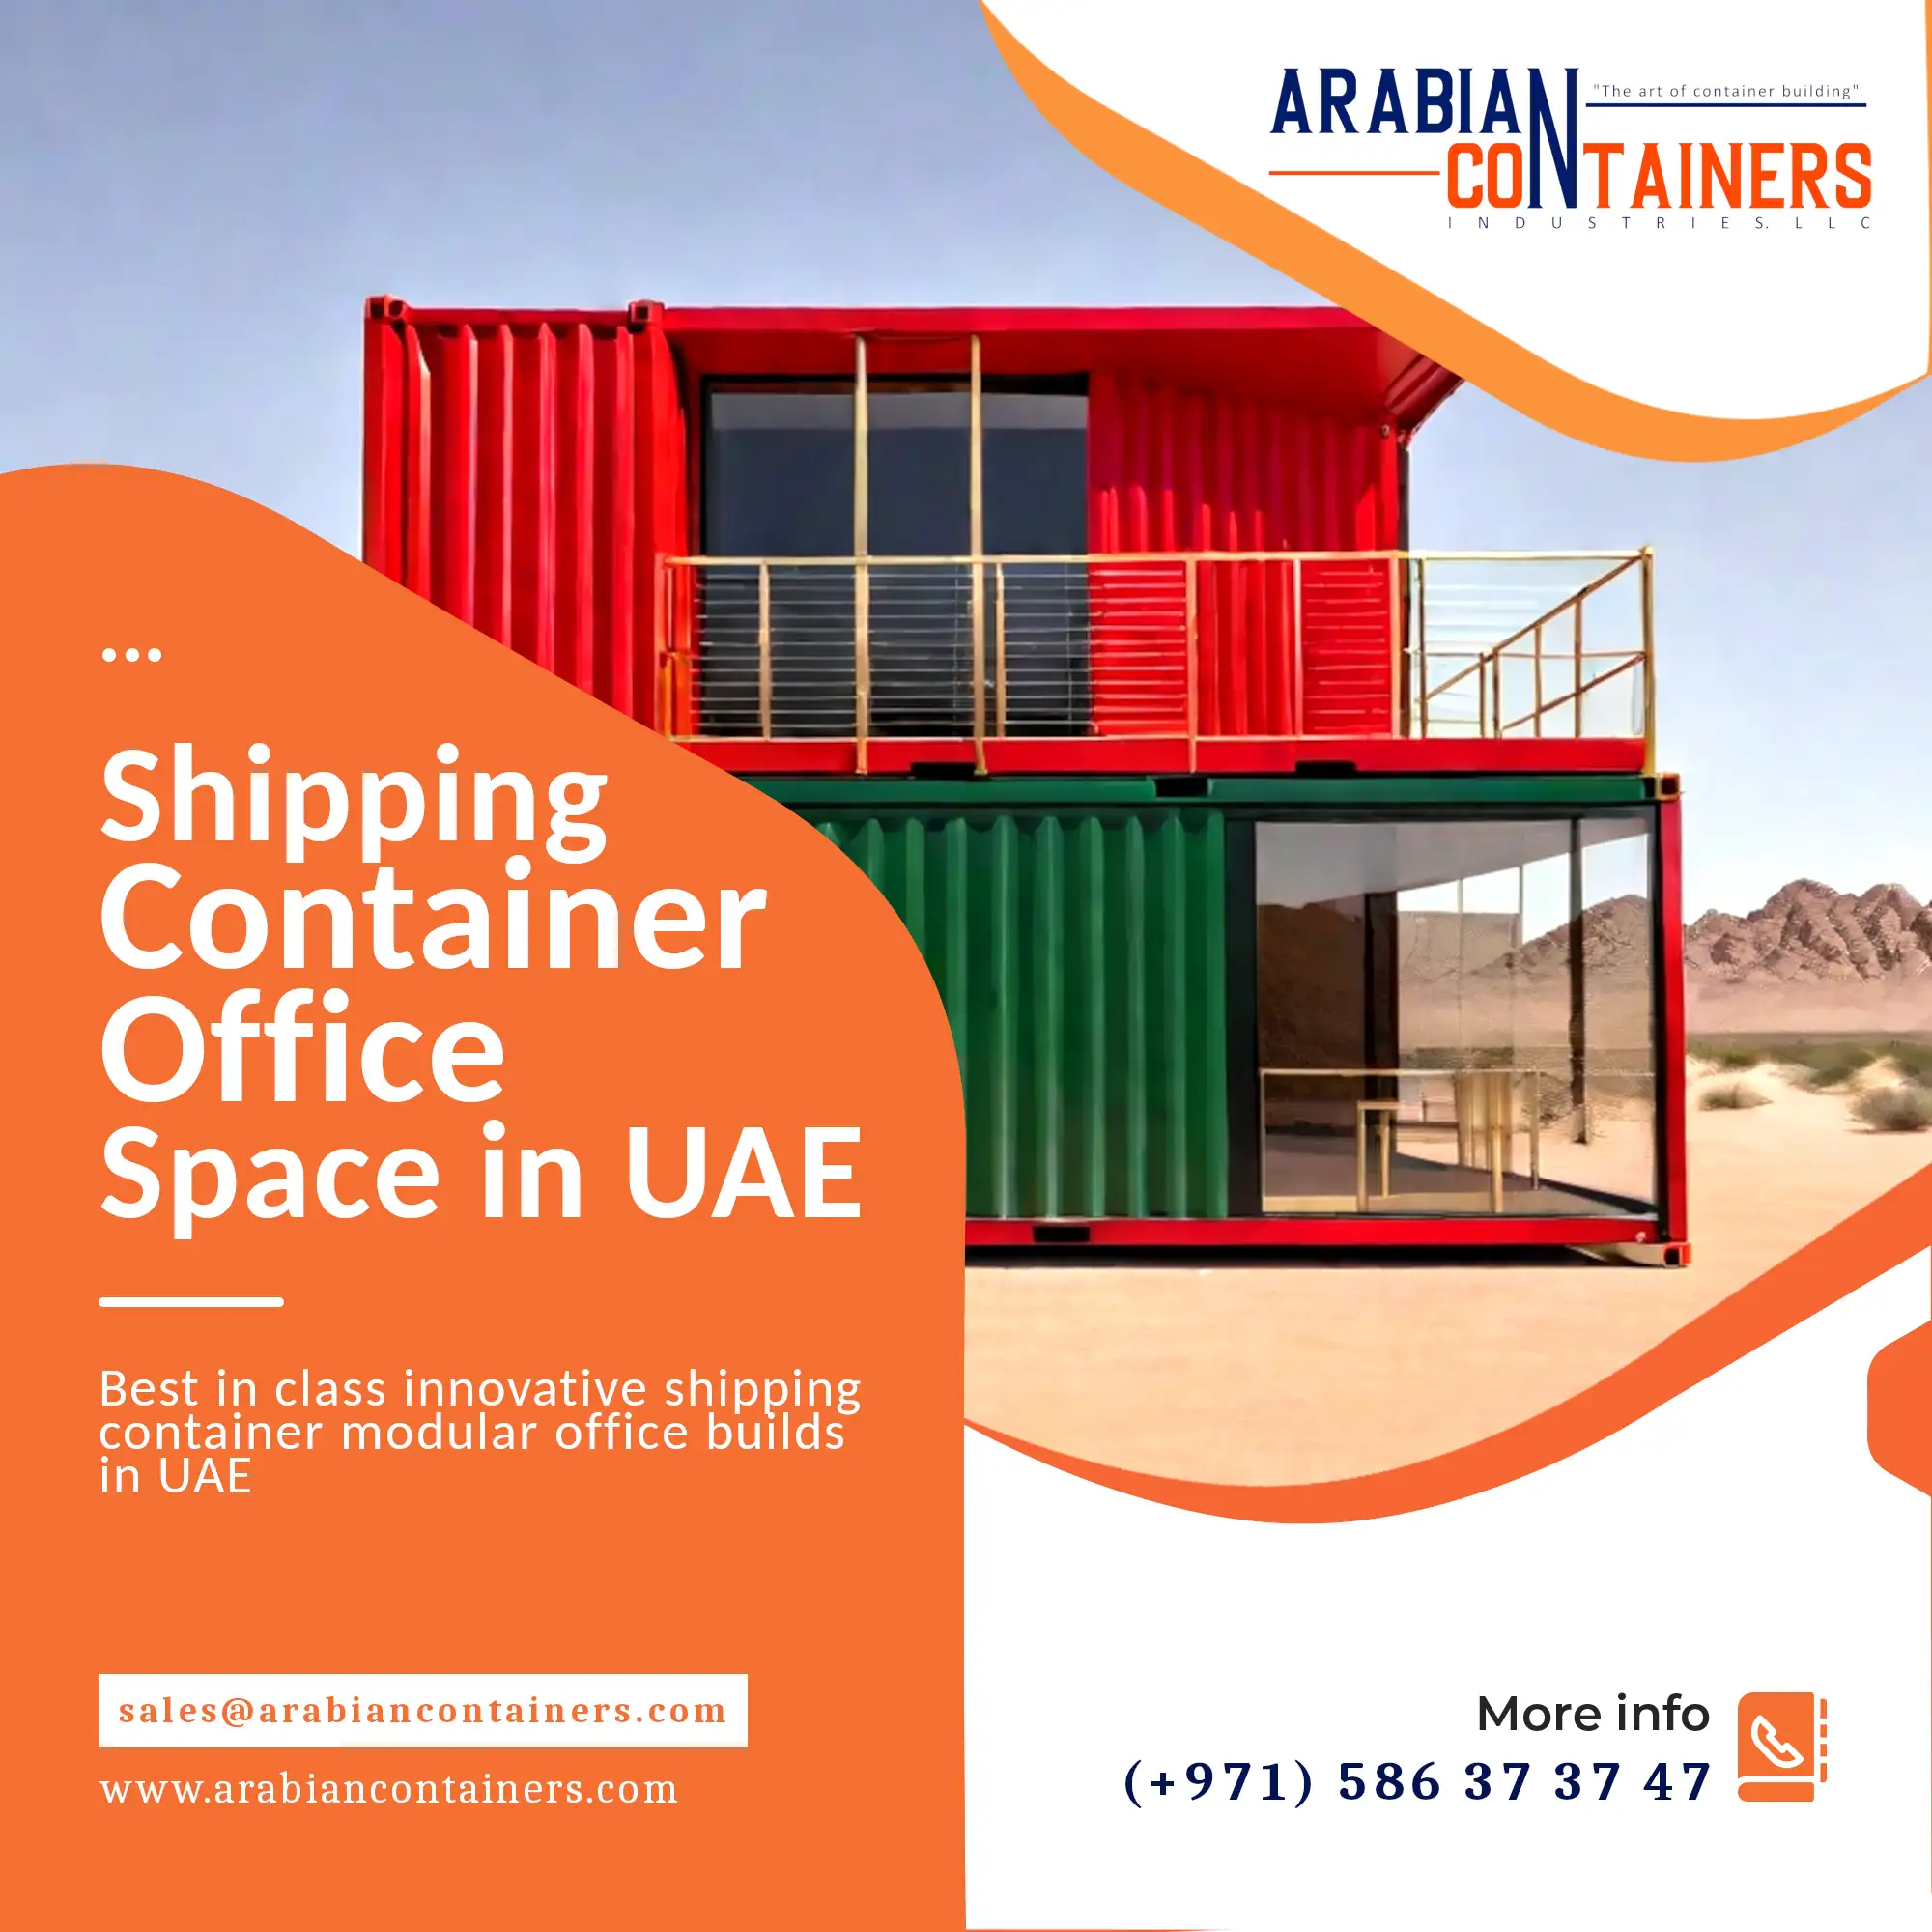 Shipping container modular office builder in UAE.